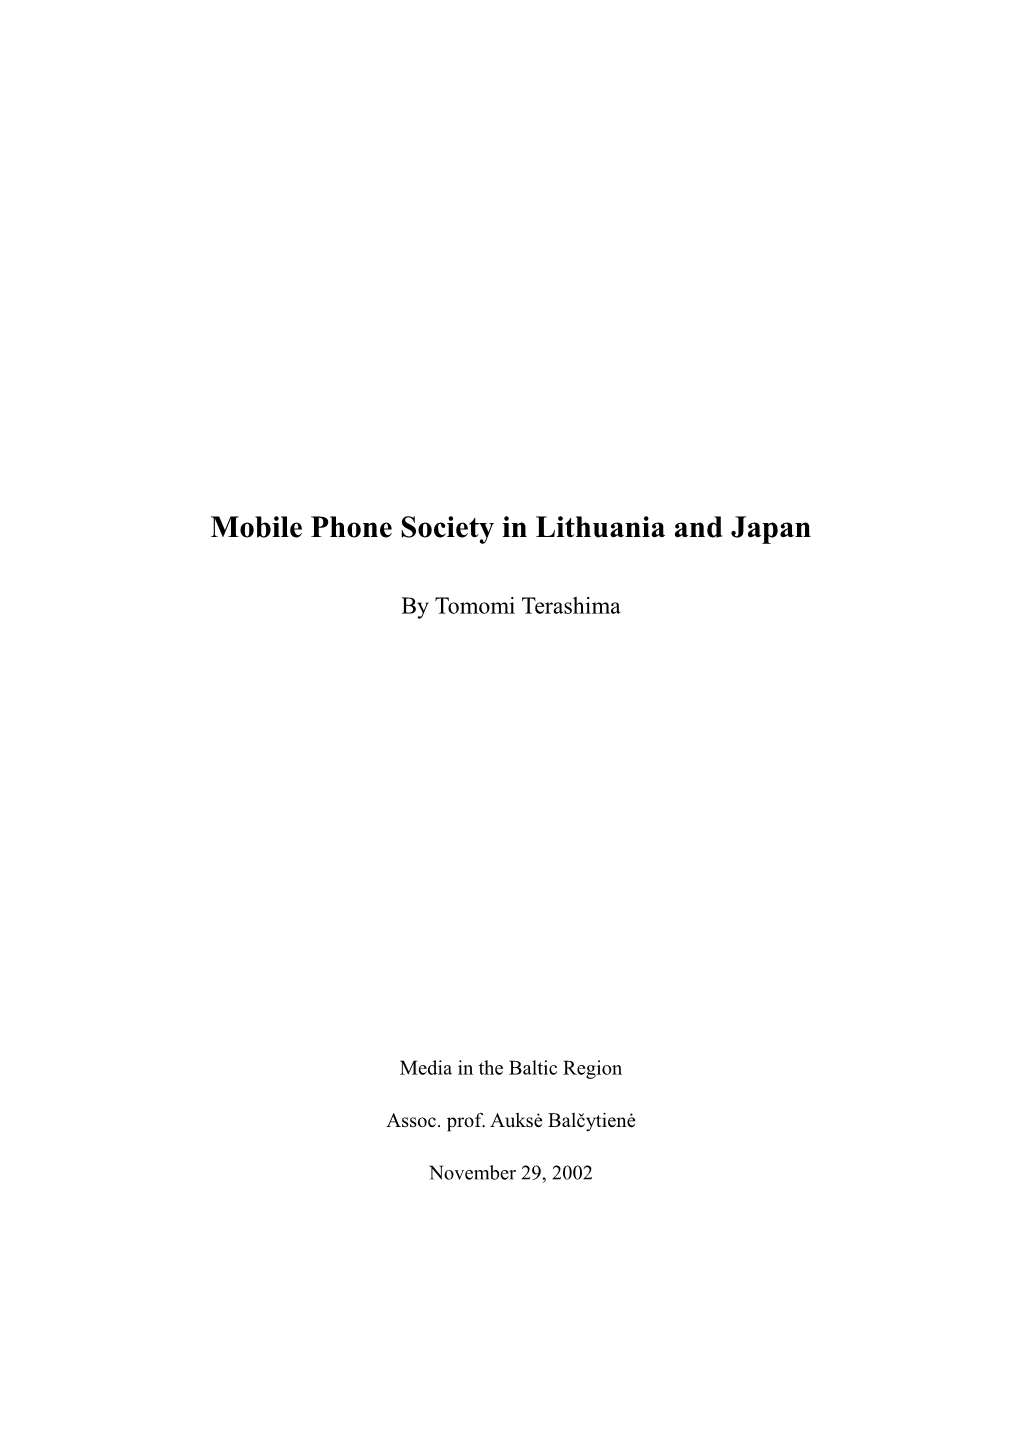 Mobile Phone Society in Lithuania and Japan